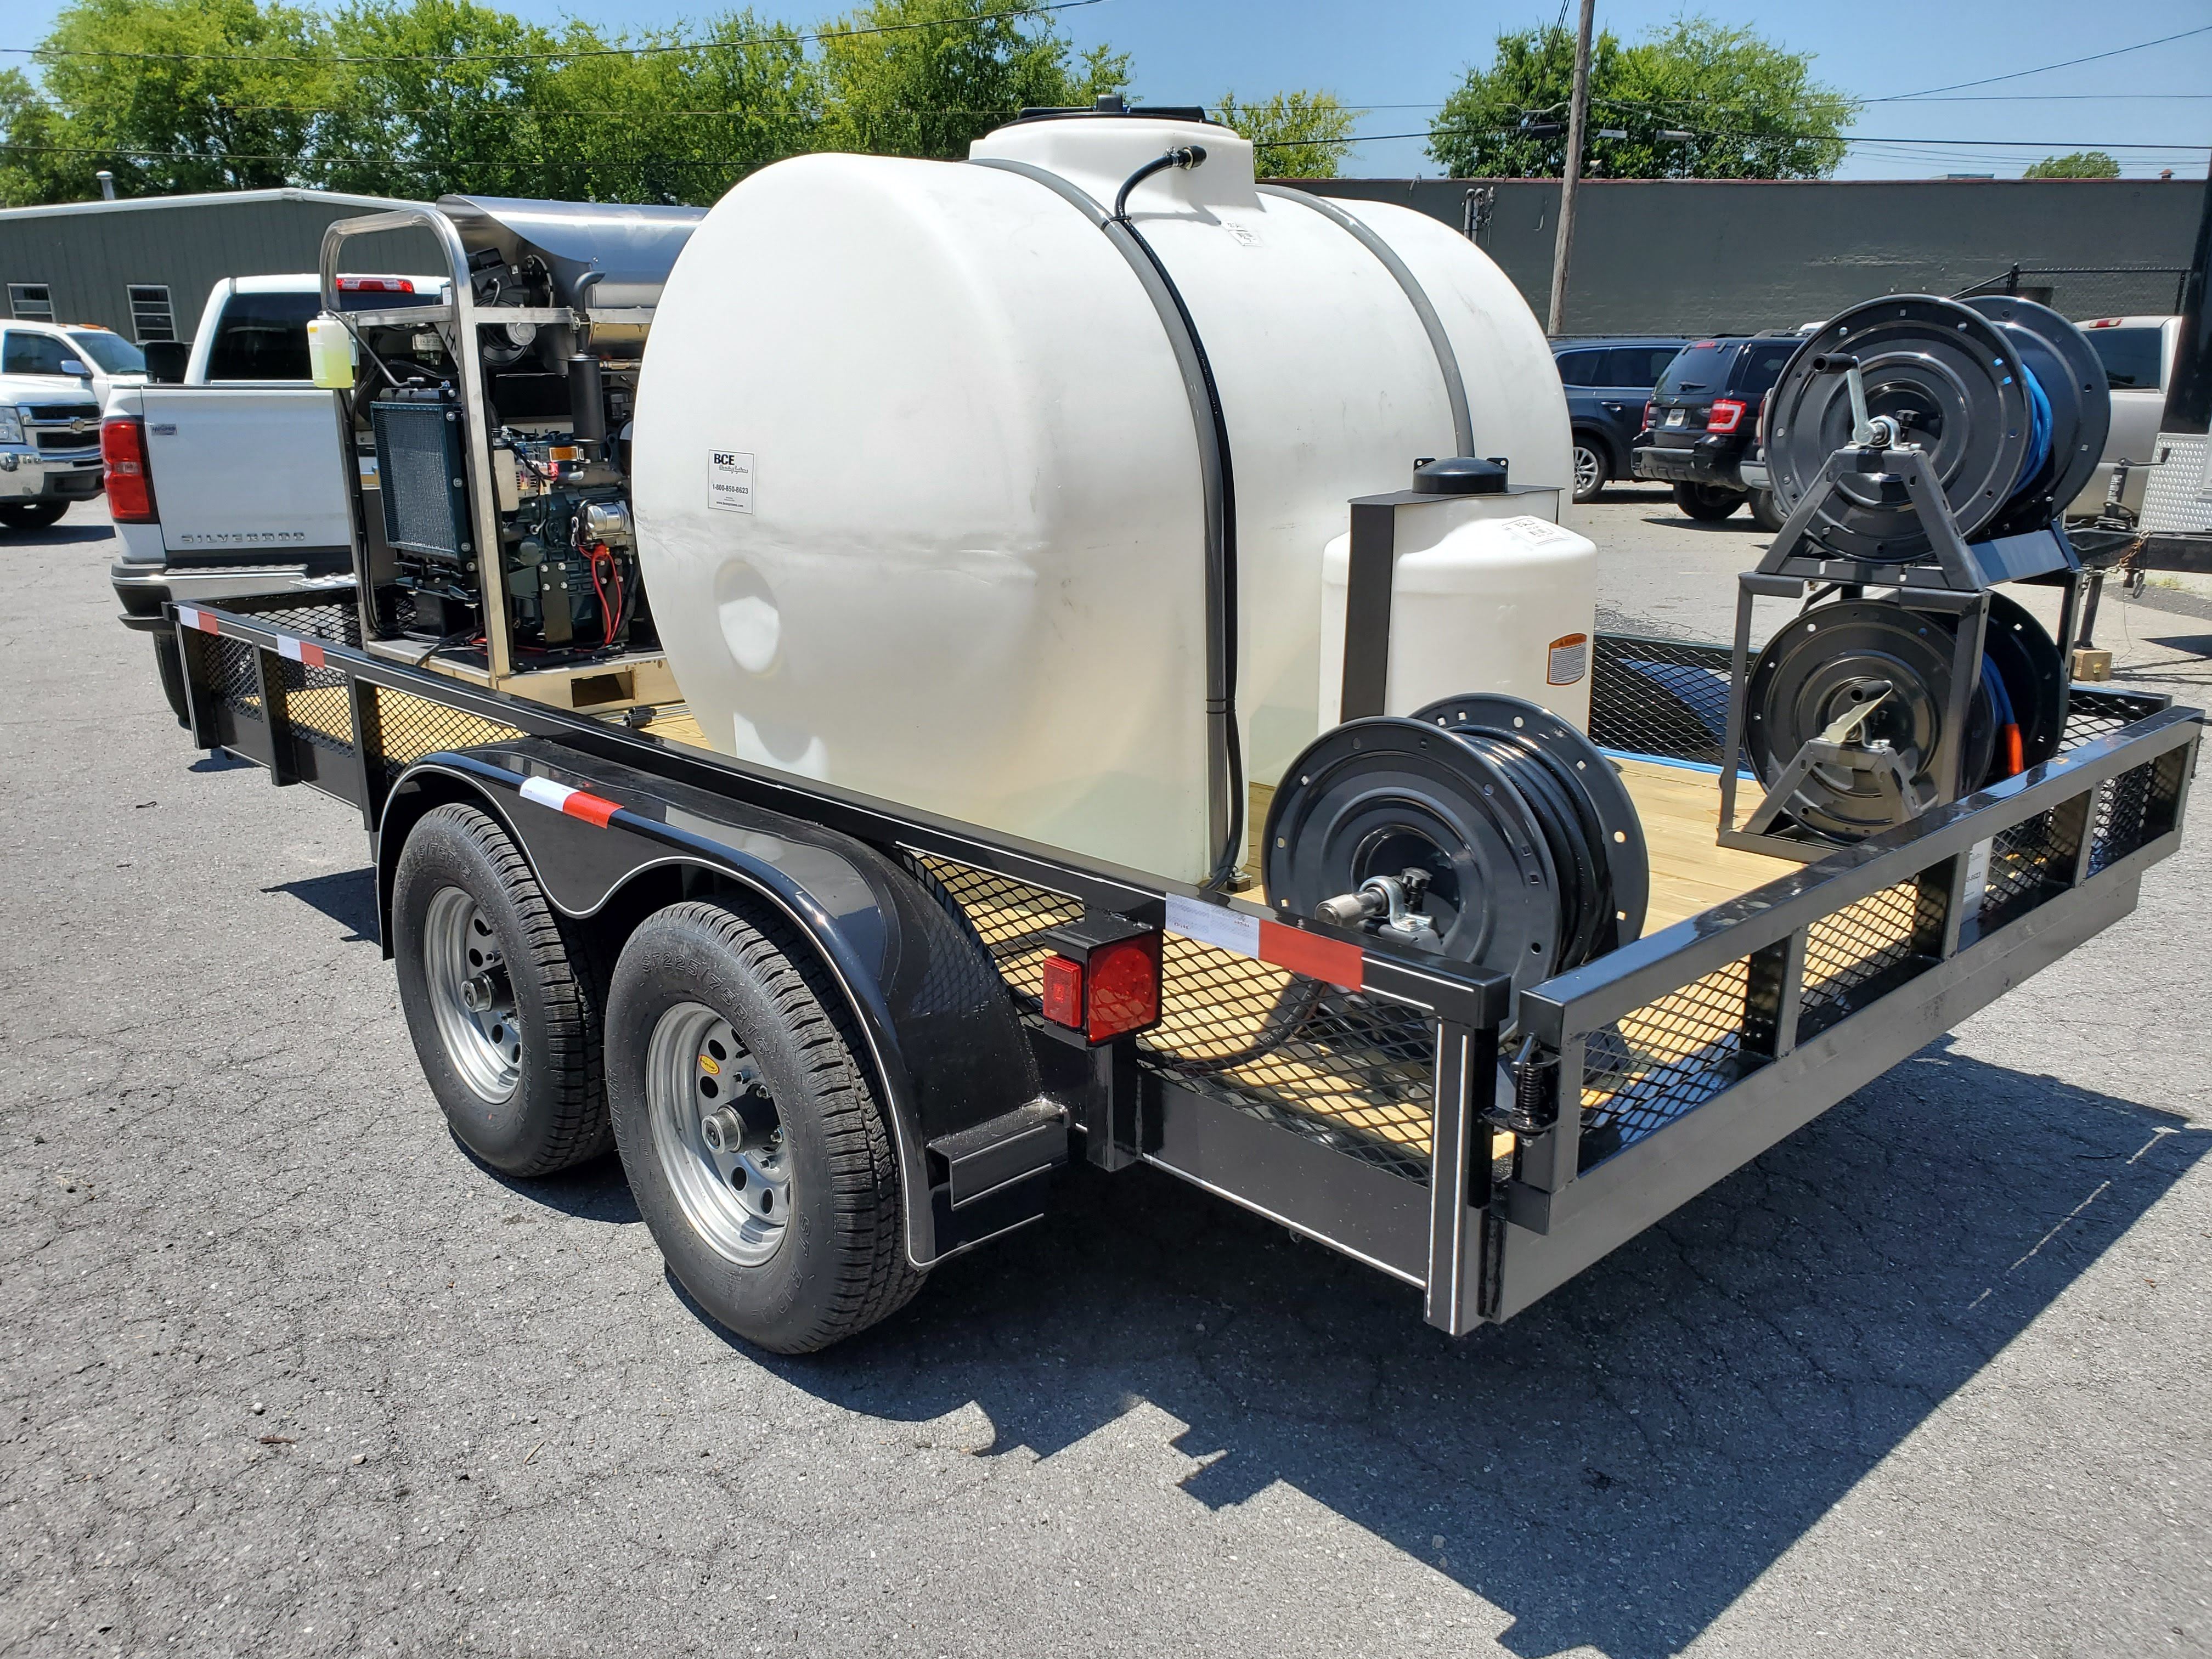 Hydro Max-8gpm at 4000psi Hot Water Trailer Package-Diesel Engine BCE Cleaning Systems 